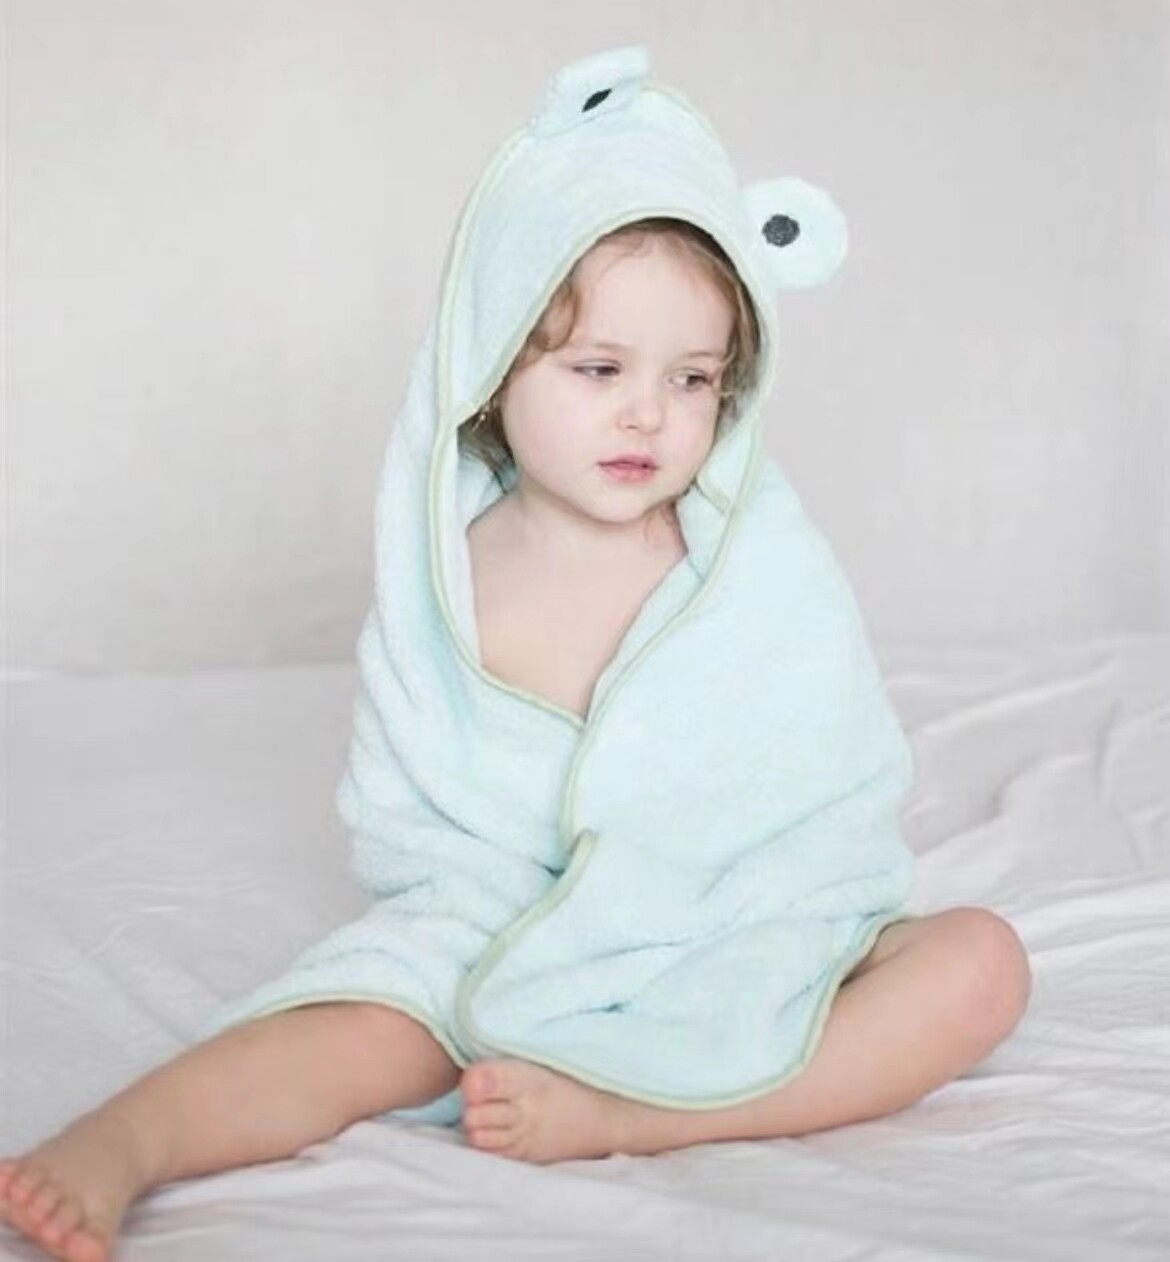 Snuggly and Soft: Inside the Baby Hooded Bath Towel Factory